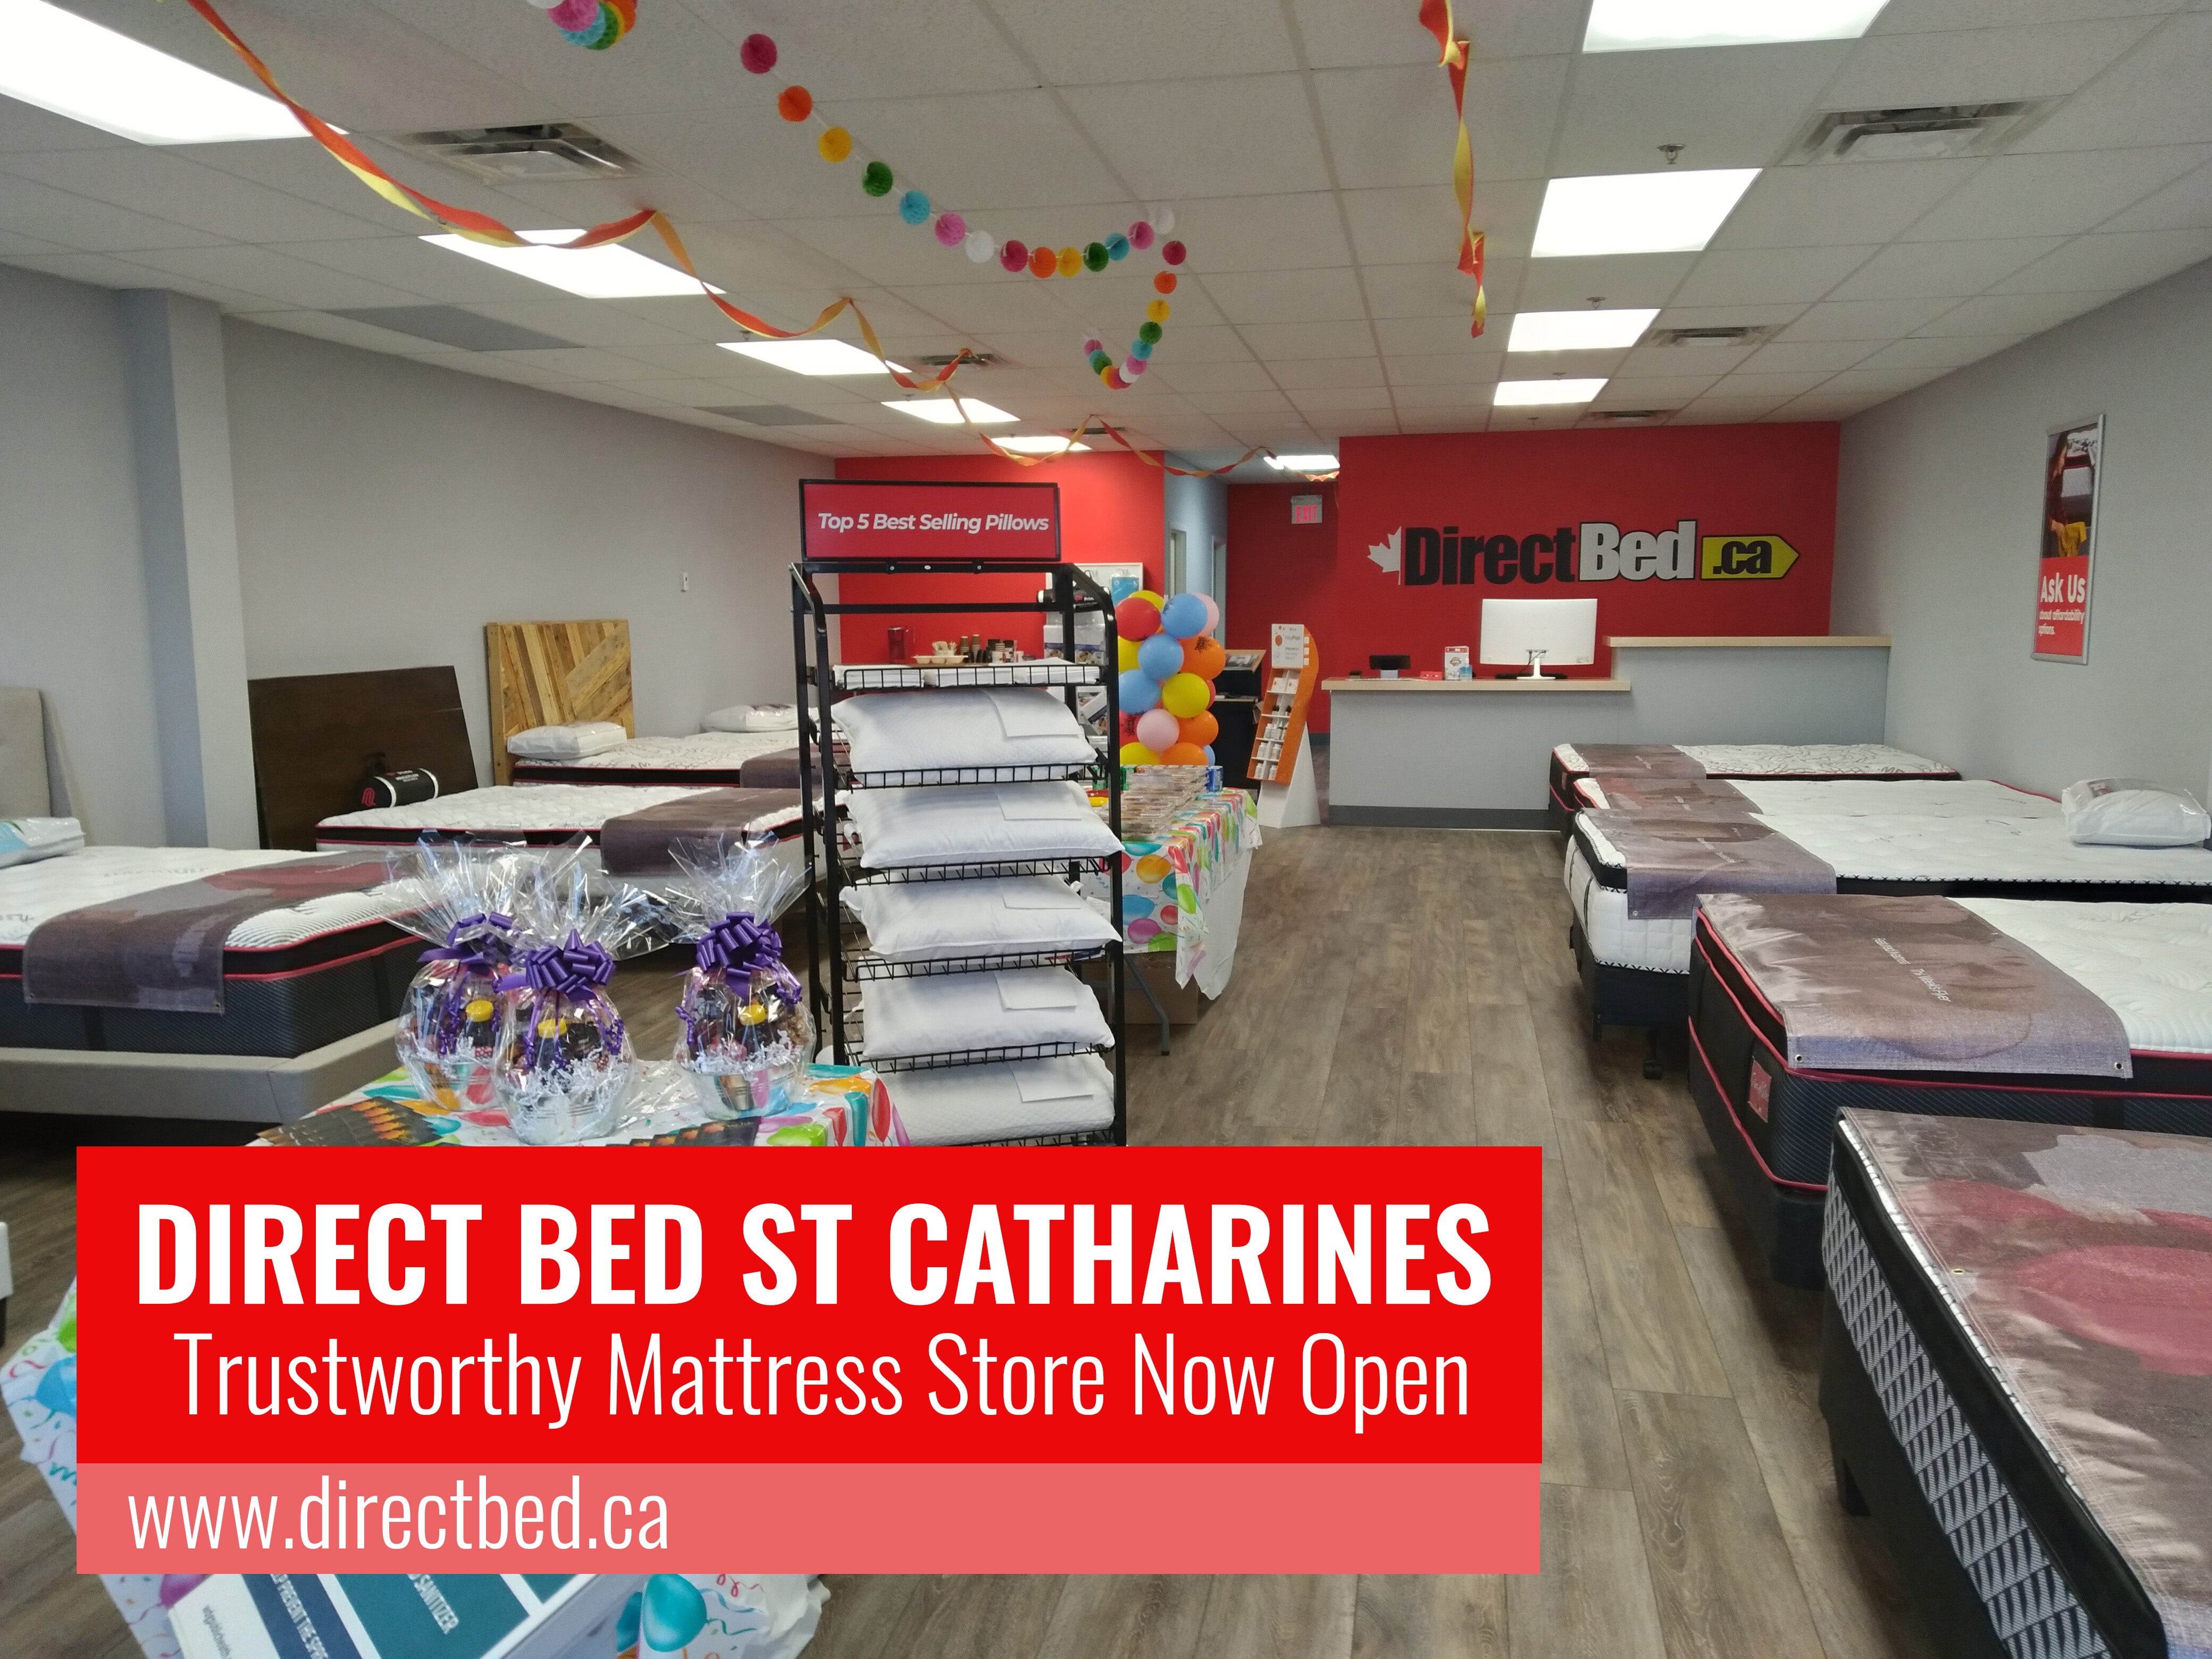 Mattress Store in St. Catharines Direct Bed Matress Store is now open in St. Catherines ontario